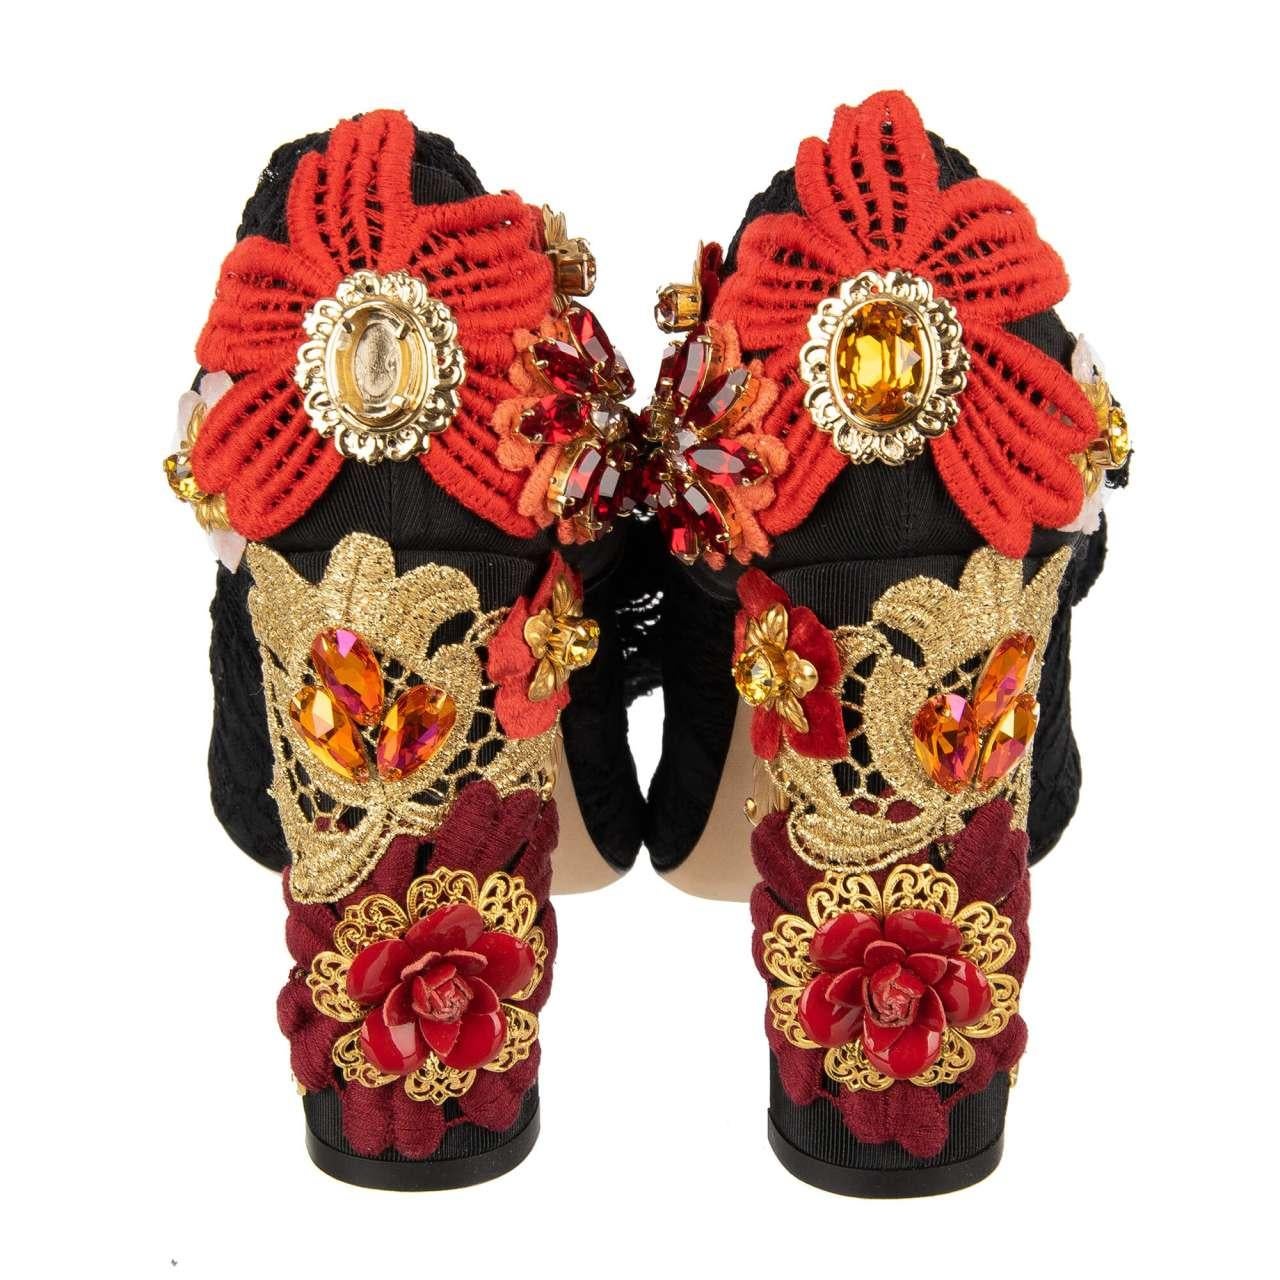 - Floral lace Pumps VALLY with crystals, brass decorations and embroidery heel in black, gold and red by DOLCE & GABBANA - New with Box - MADE IN ITALY - Flower embroidery - Model: CT0158-AD213-89969 - Material: 93% Polyamid, 7% Elastane - Inner